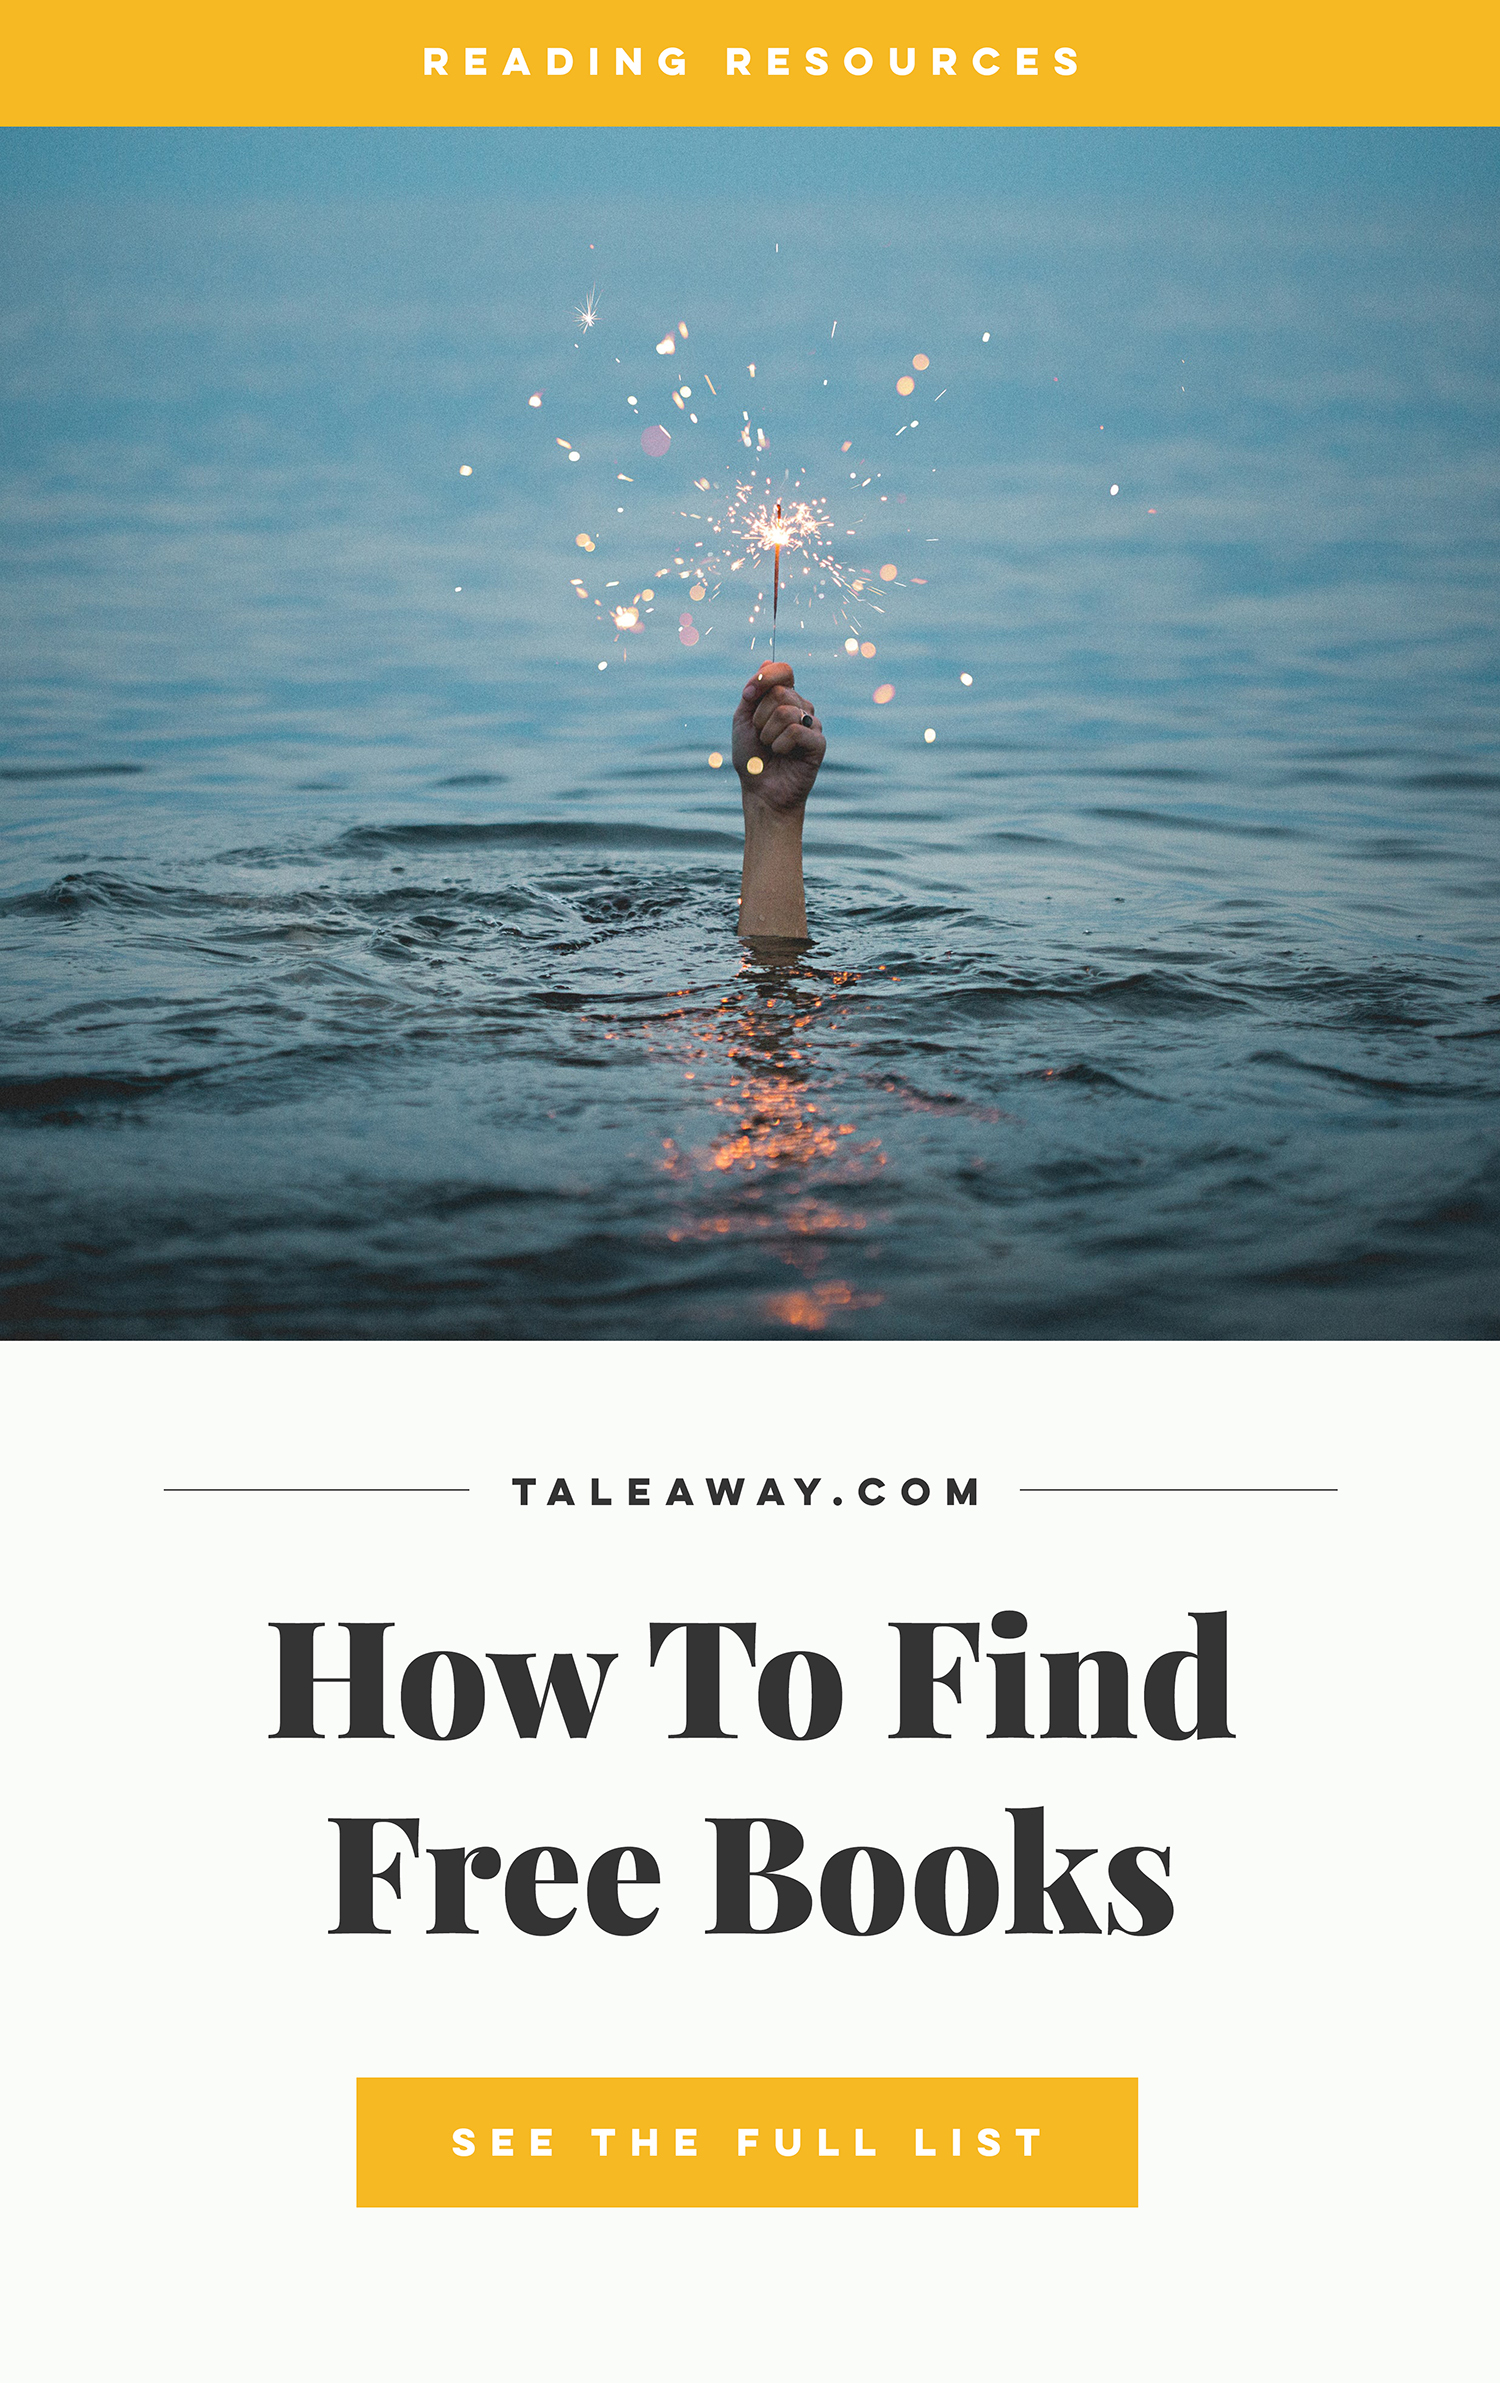 How To Find Free Books And Save On Them Too - free books, free books online, free book downloads, free books on kindle, free books to read, free book downloading sites, books to read, cheap books, discount books, save on books, books app, books download, books download sites, books free download, books kindle, books online, books unlimited, read books for free, get free books, find free books, free books online download, free books to read online, sites to download free books, audible trial, scribd trial, kindle unlimited, public domain